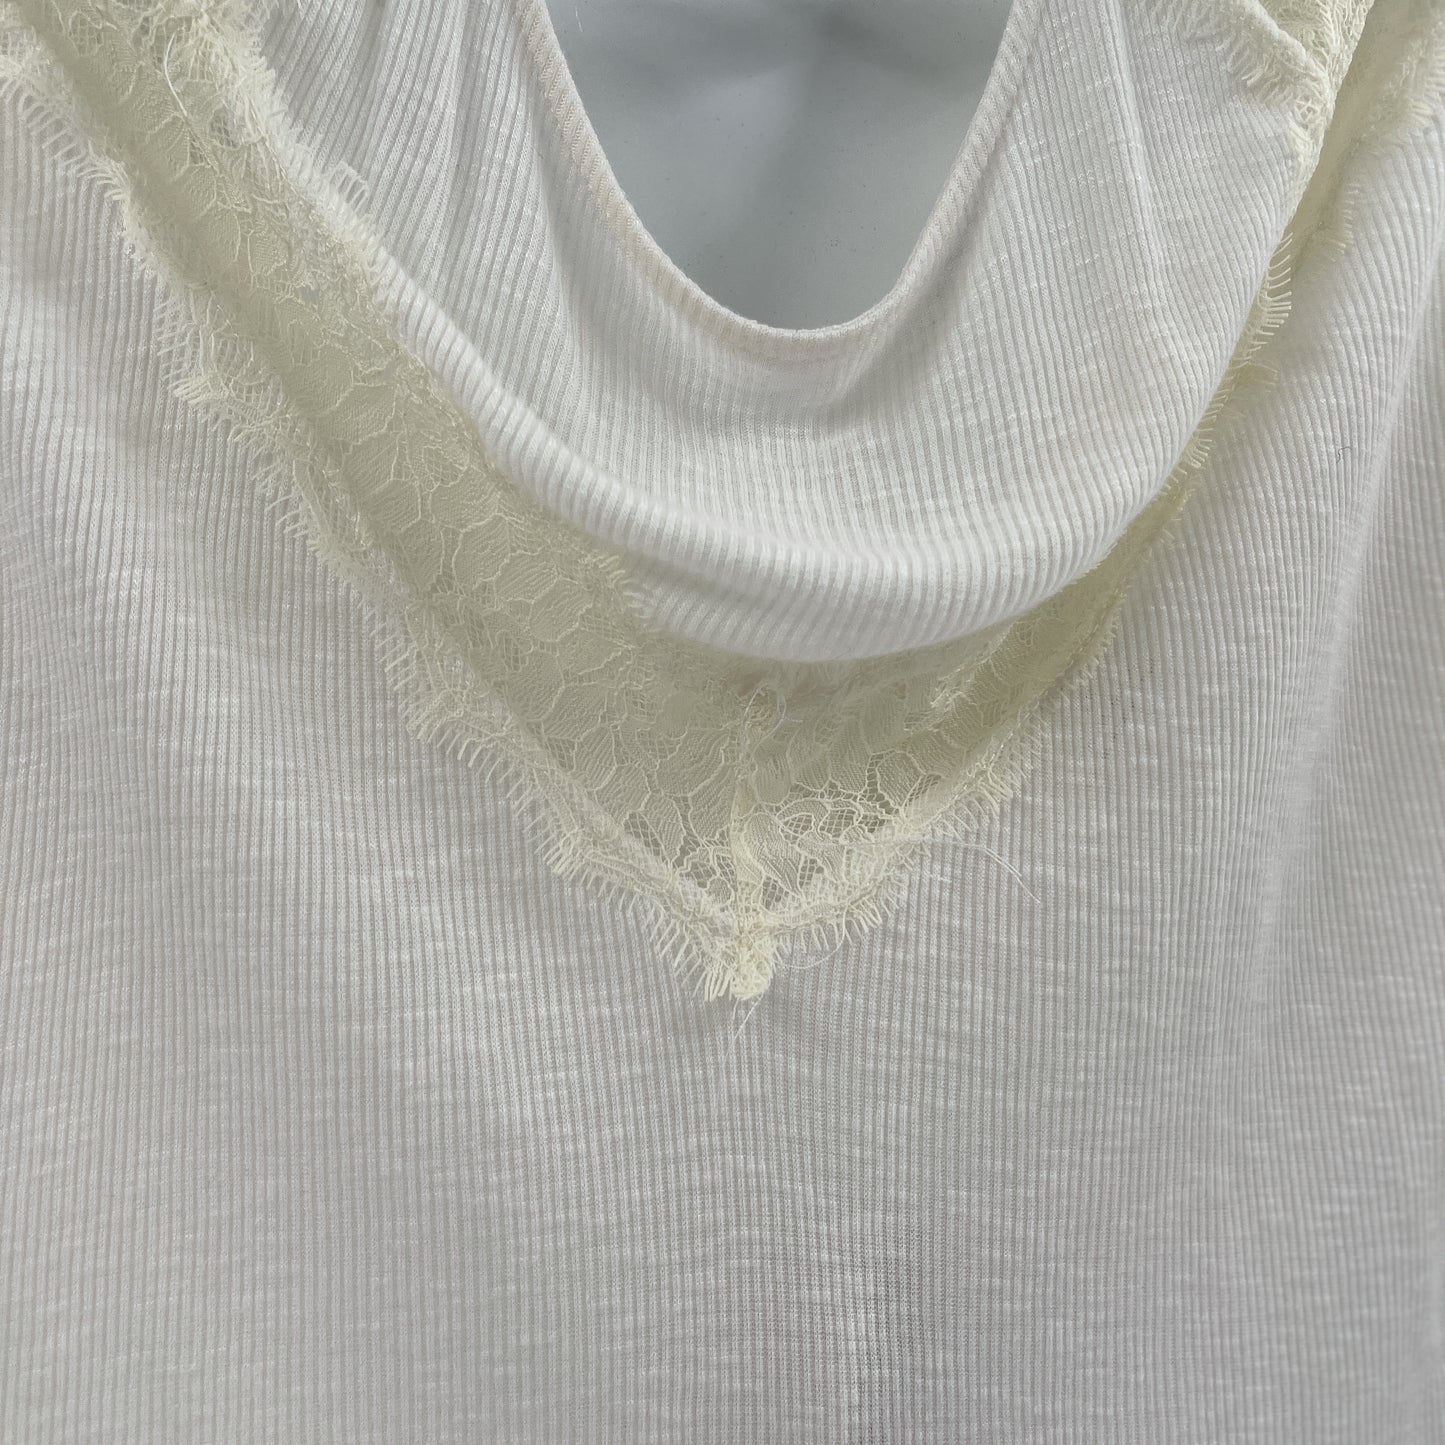 Pins and Needles White Lace Cold Shoulder (XS)